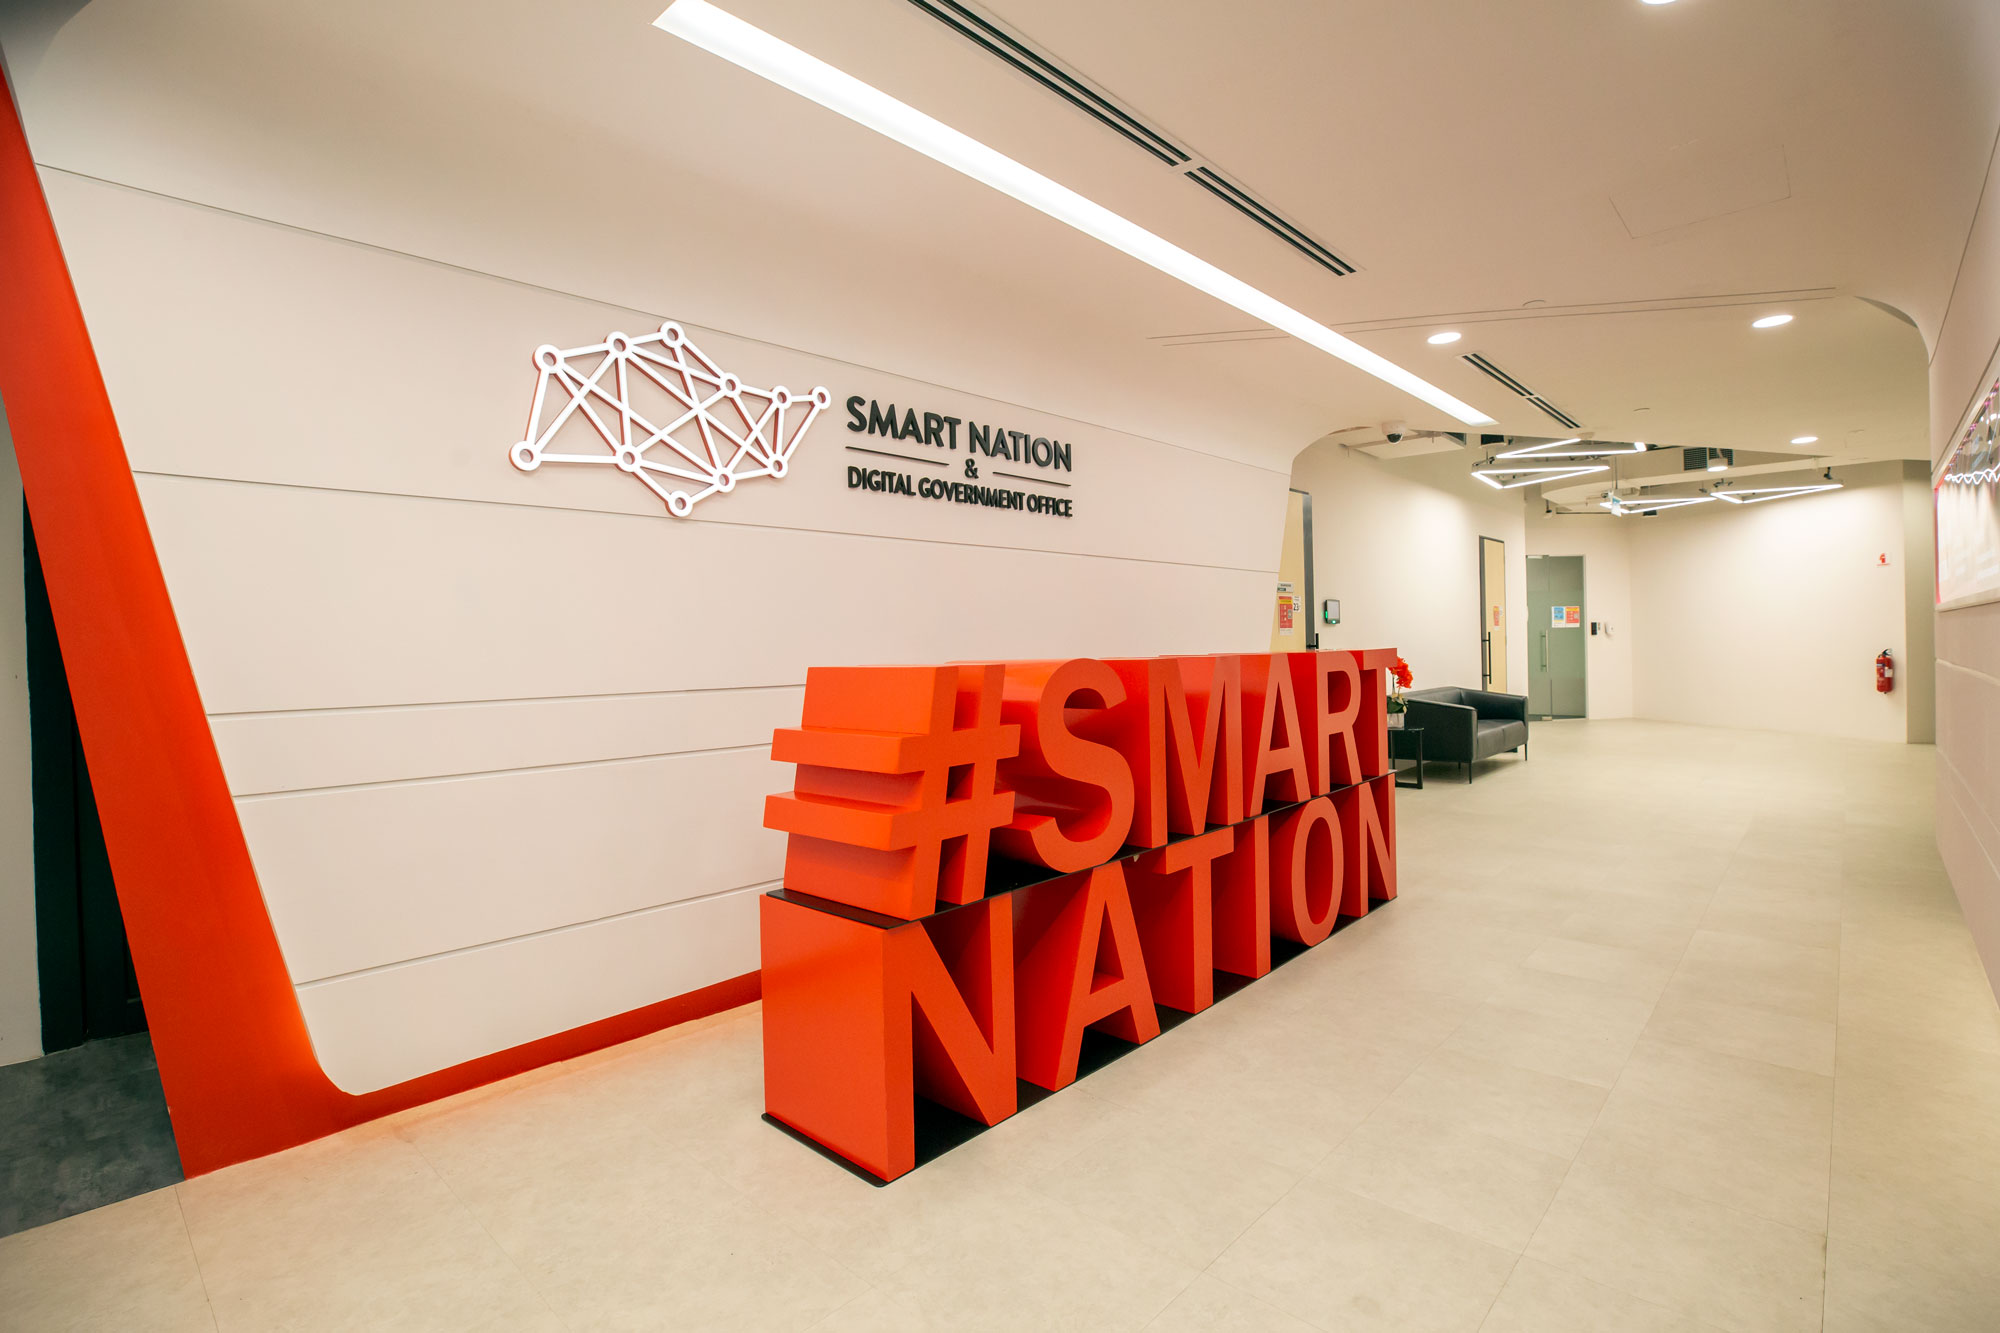 Smart Nation and Digital Government Office